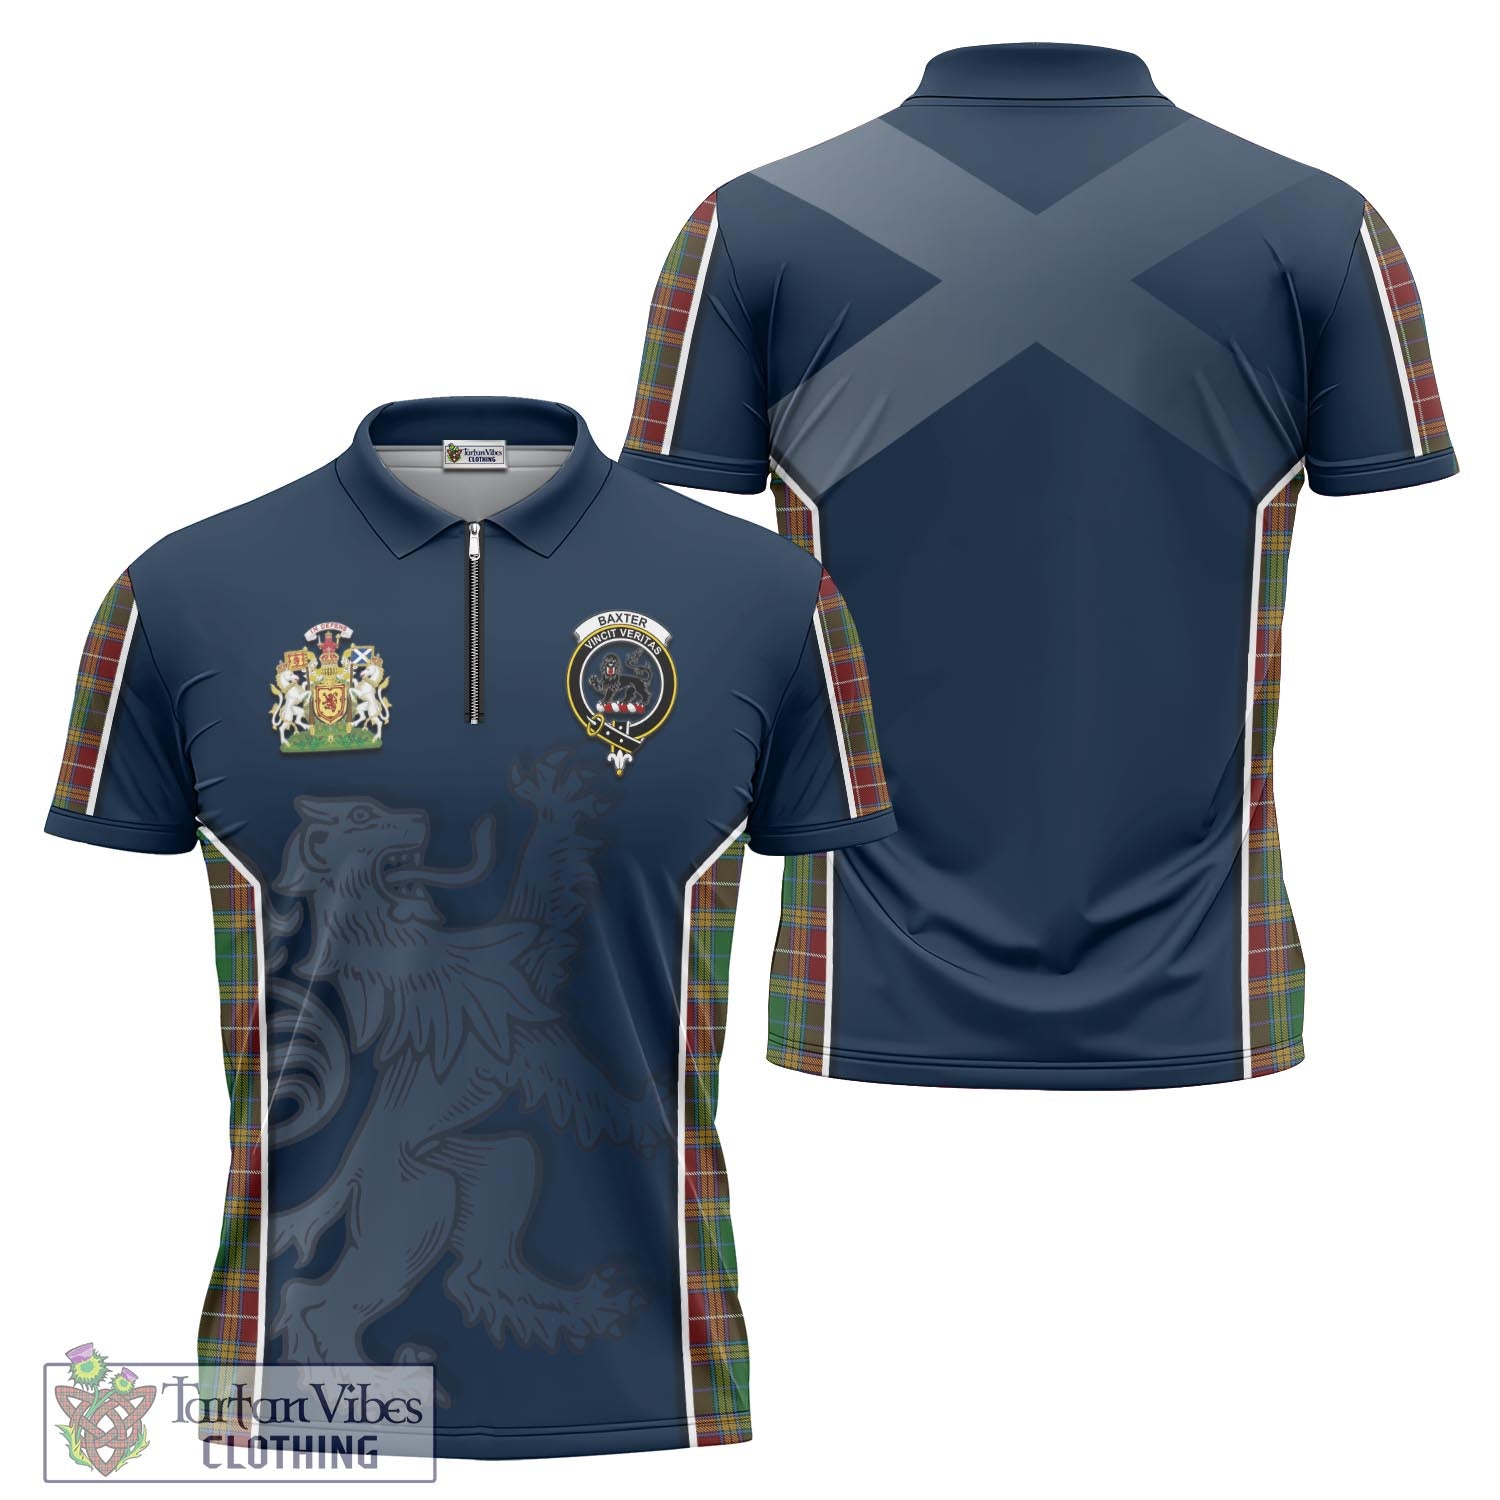 Tartan Vibes Clothing Baxter Tartan Zipper Polo Shirt with Family Crest and Lion Rampant Vibes Sport Style